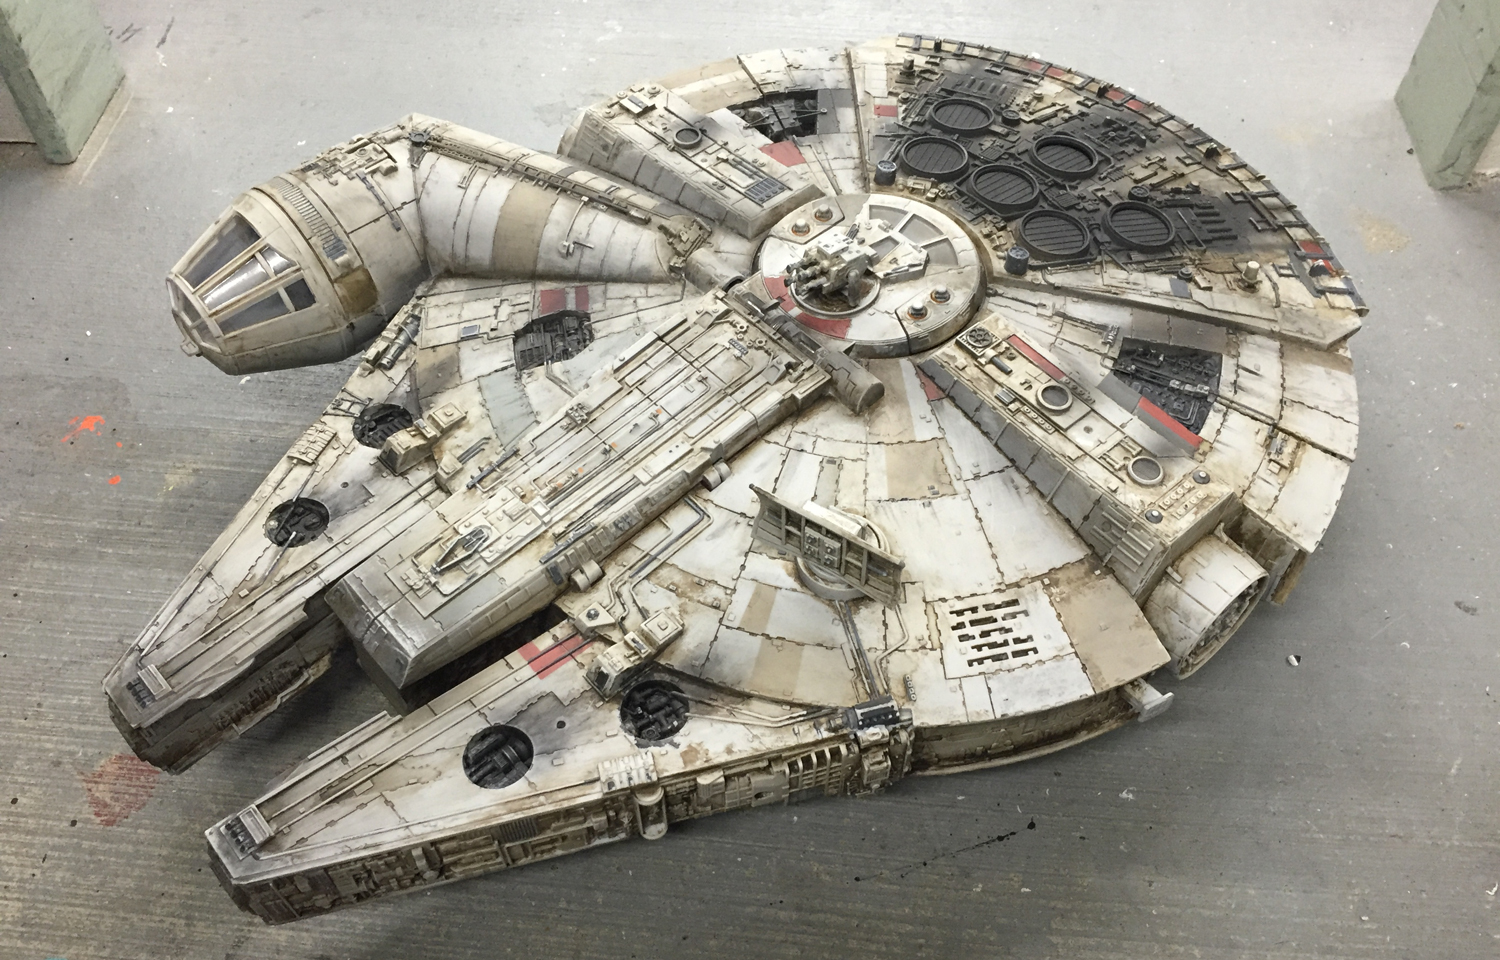 A Masterful Paint Job Makes This Millennium Falcon Toy Look Like A Star Wars Movie Prop